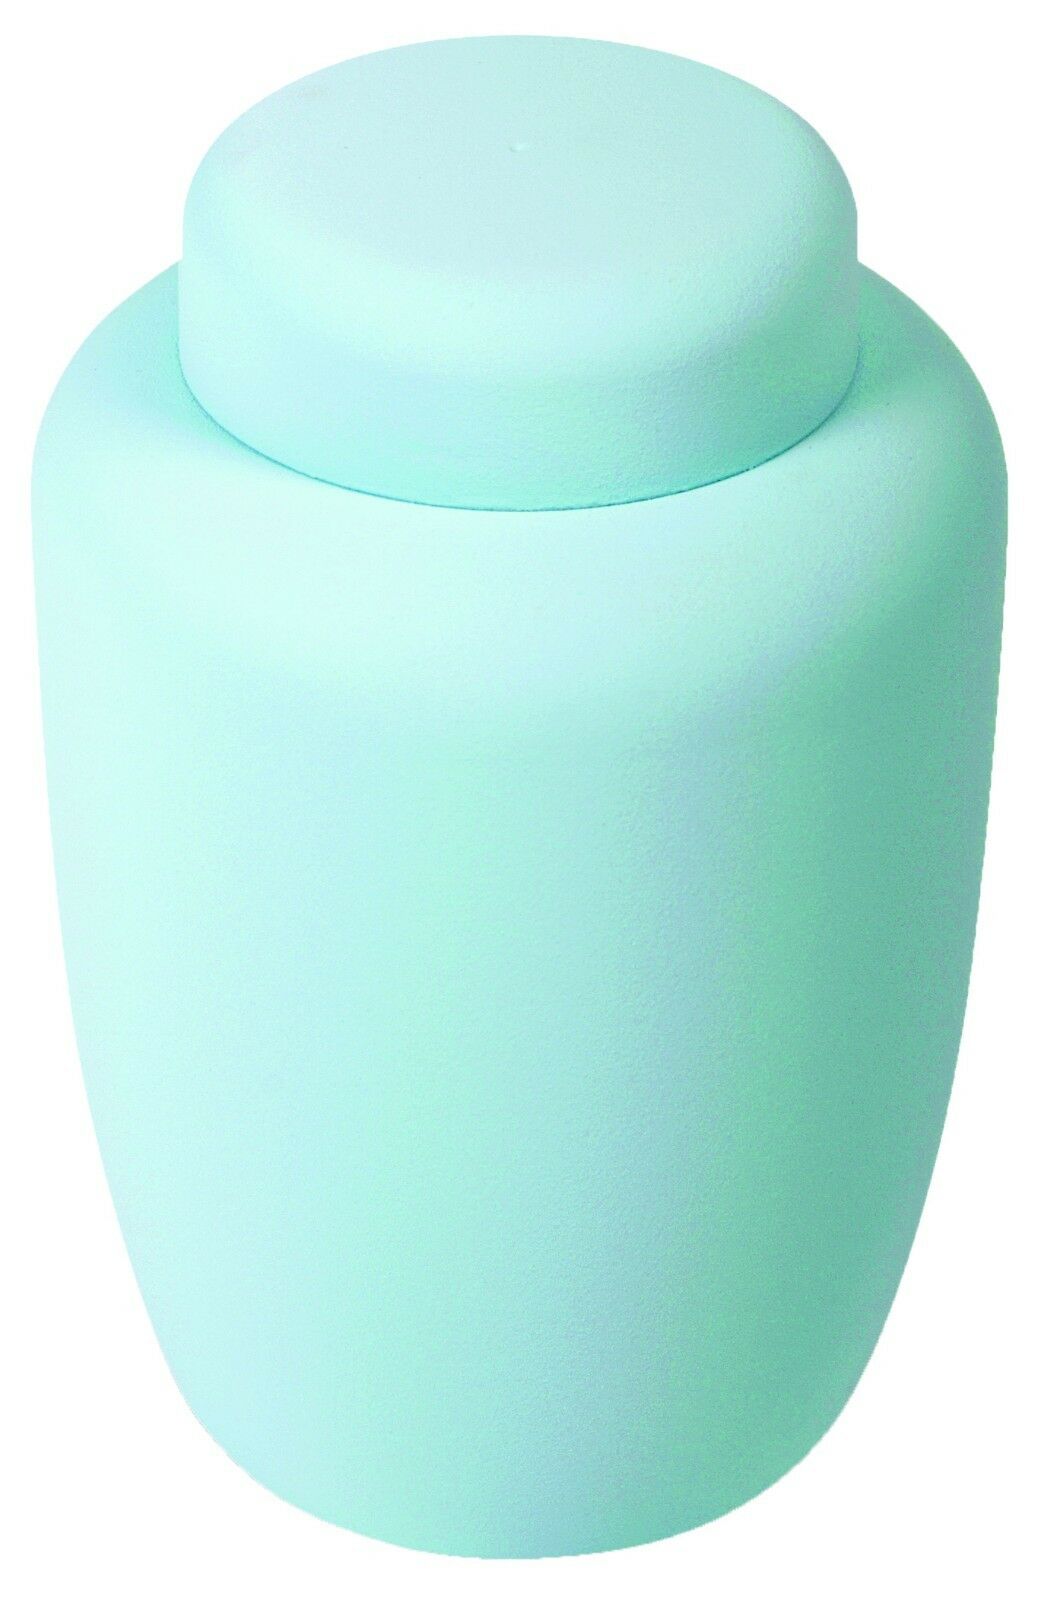 Pale Blue Cornstarch 238 Cubic Inches Large/Adult Funeral Cremation Urn